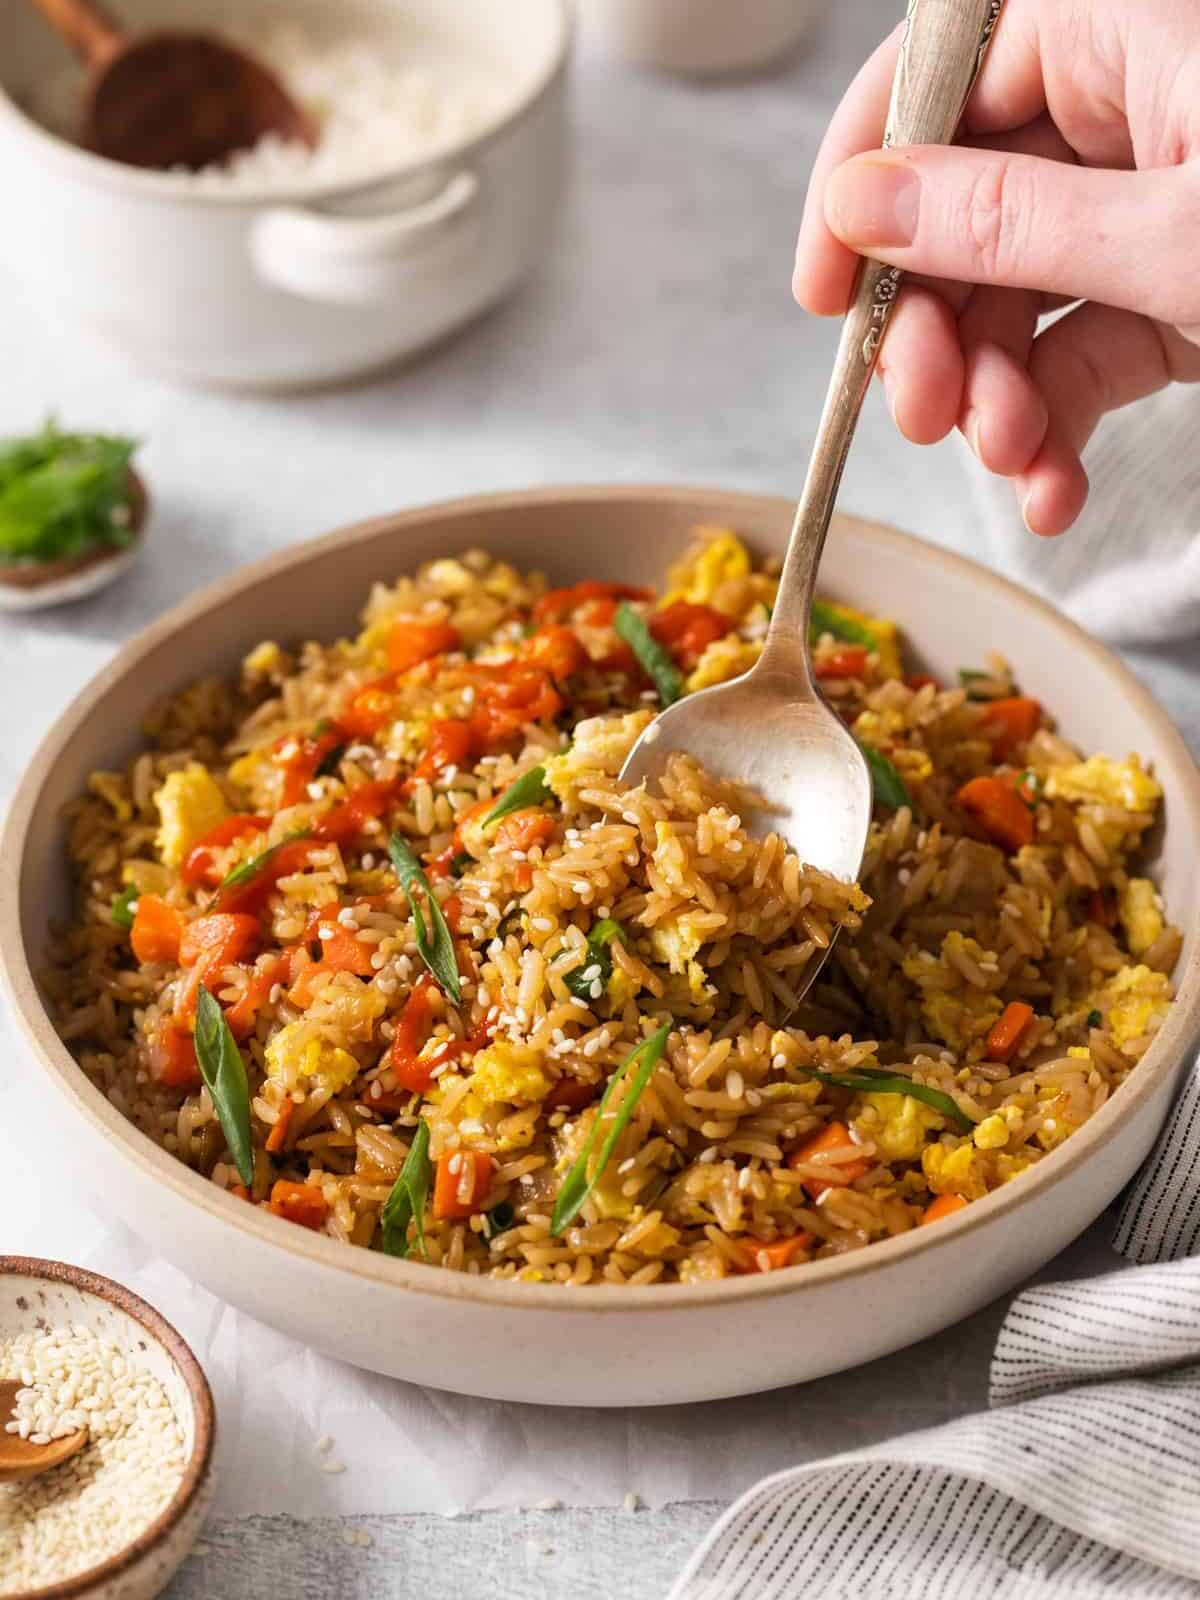 three-quarters view of a spoon scooping fried rice with egg and veggies from a white bowl.